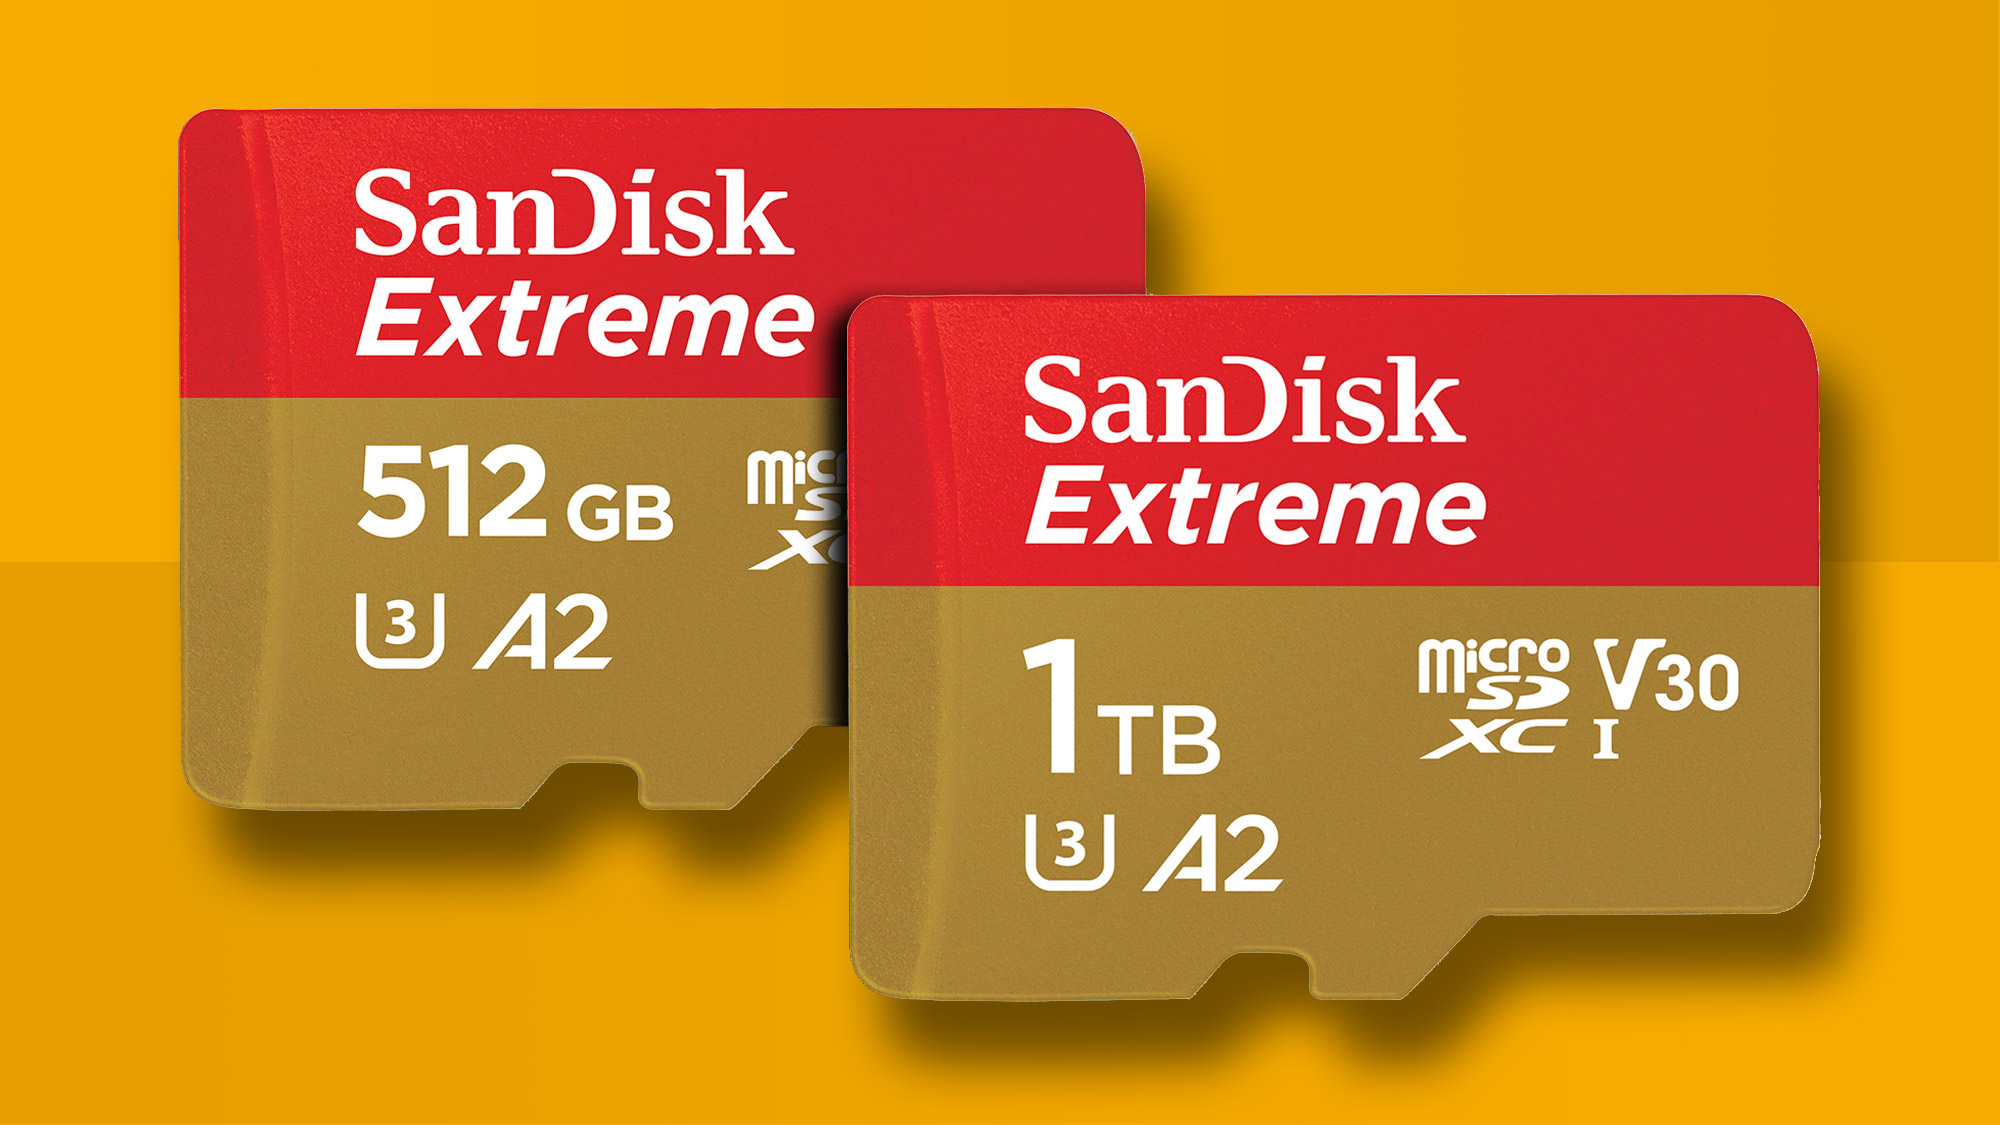 This Super Cheap 1tb Microsd Card Highlights A Massive Failure In The Storage Industry